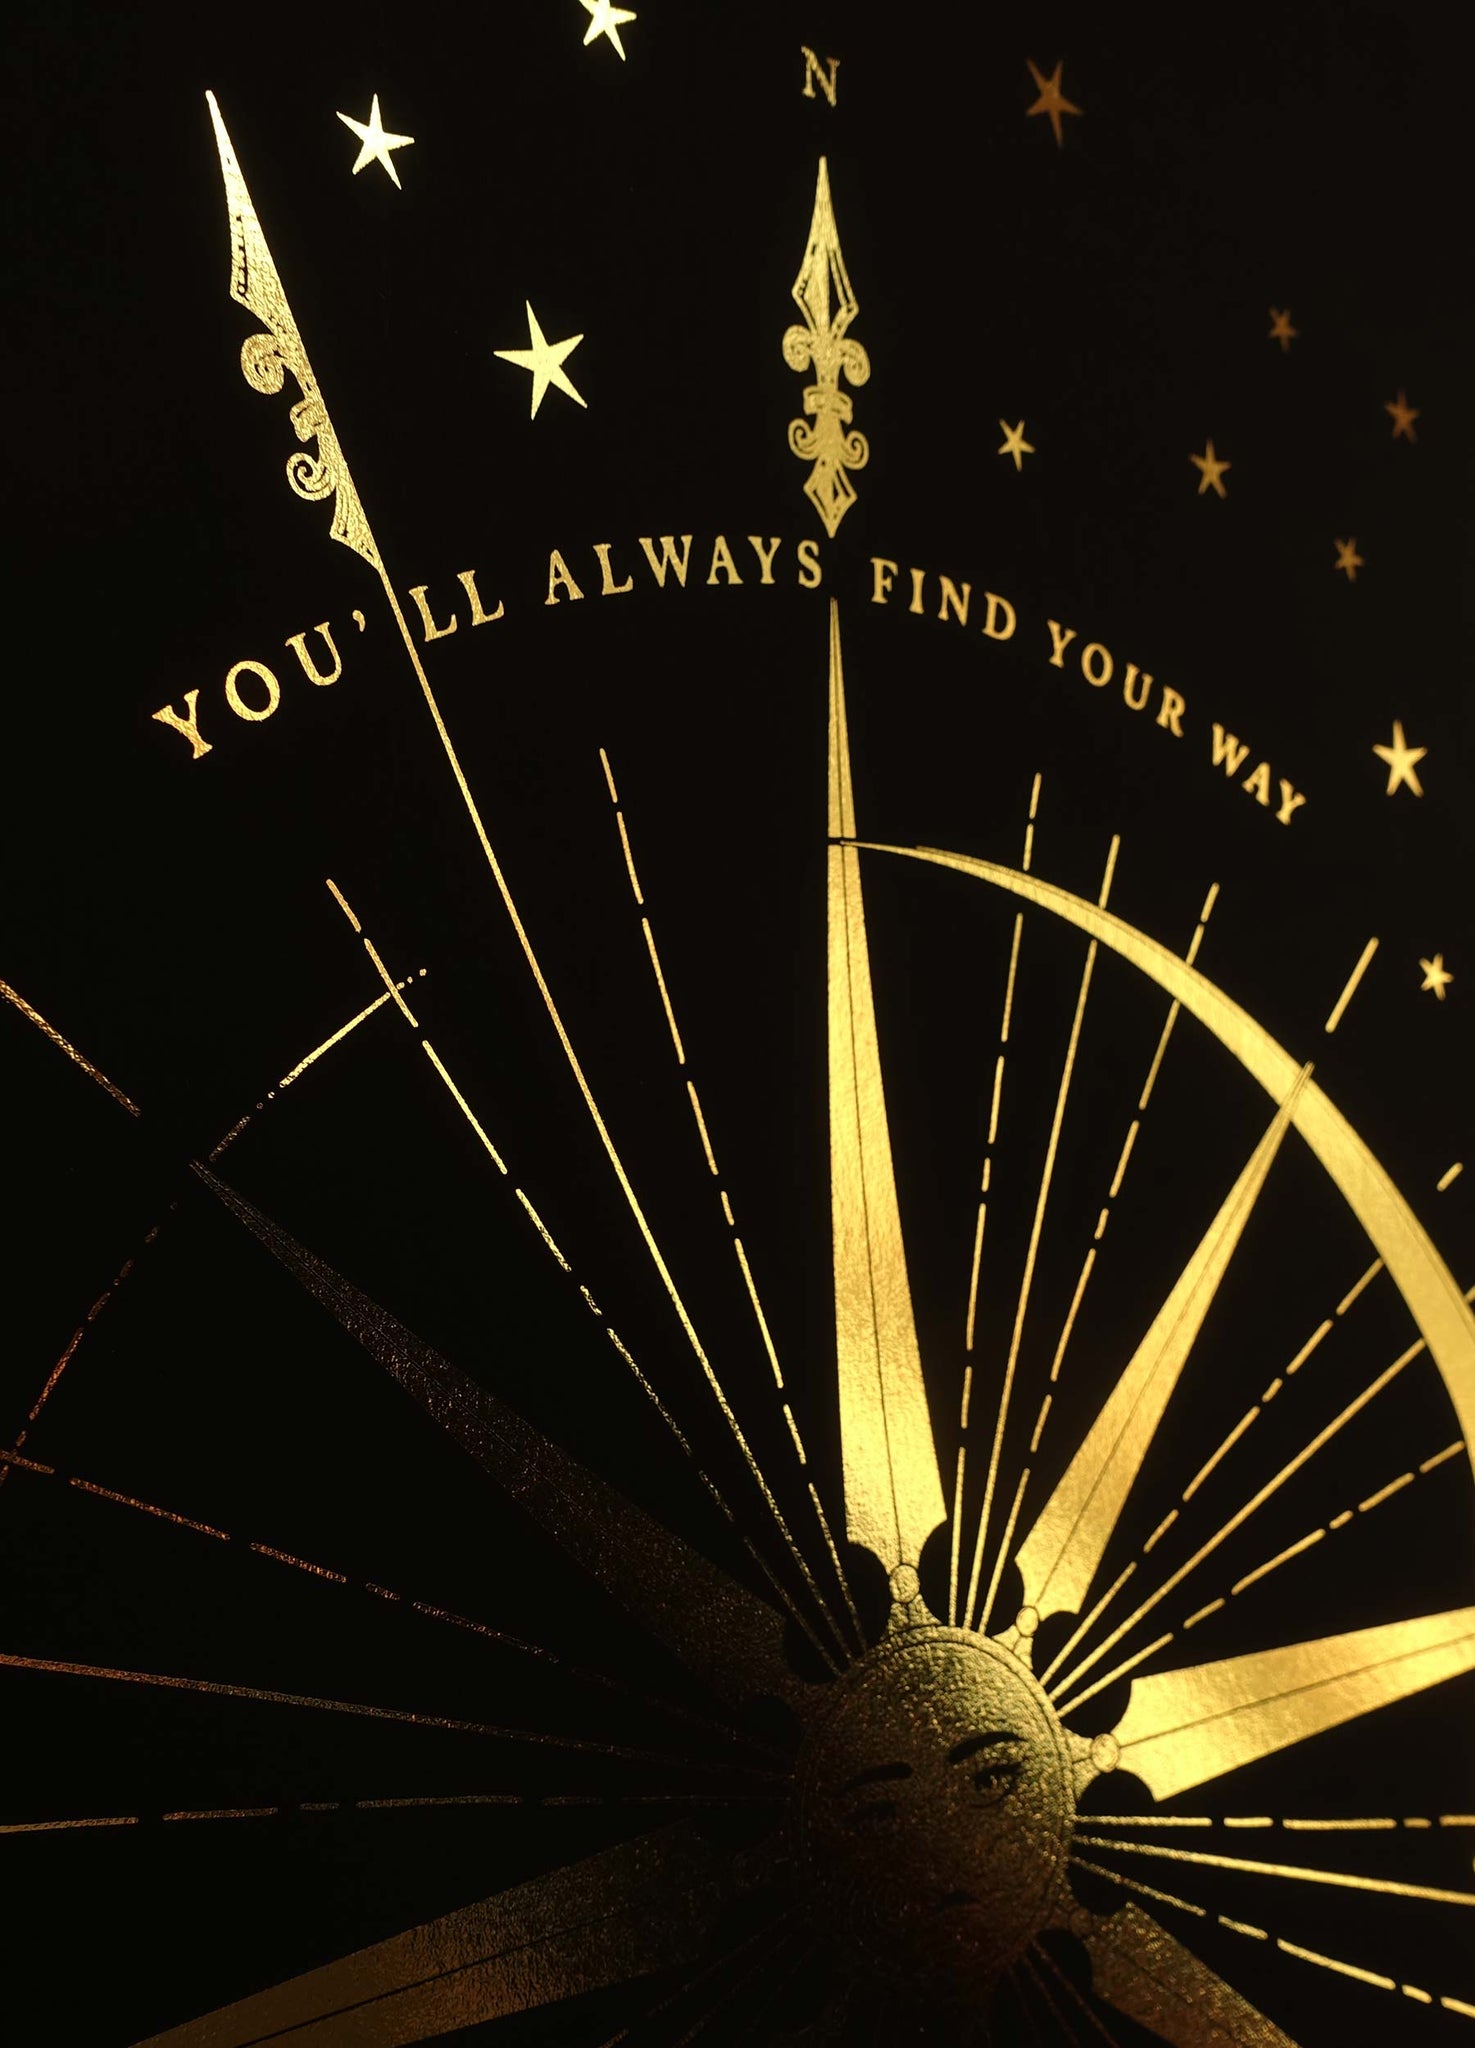 Find your way home Sun Moon Compass gold foil art print on black paper by Cocorrina & Co